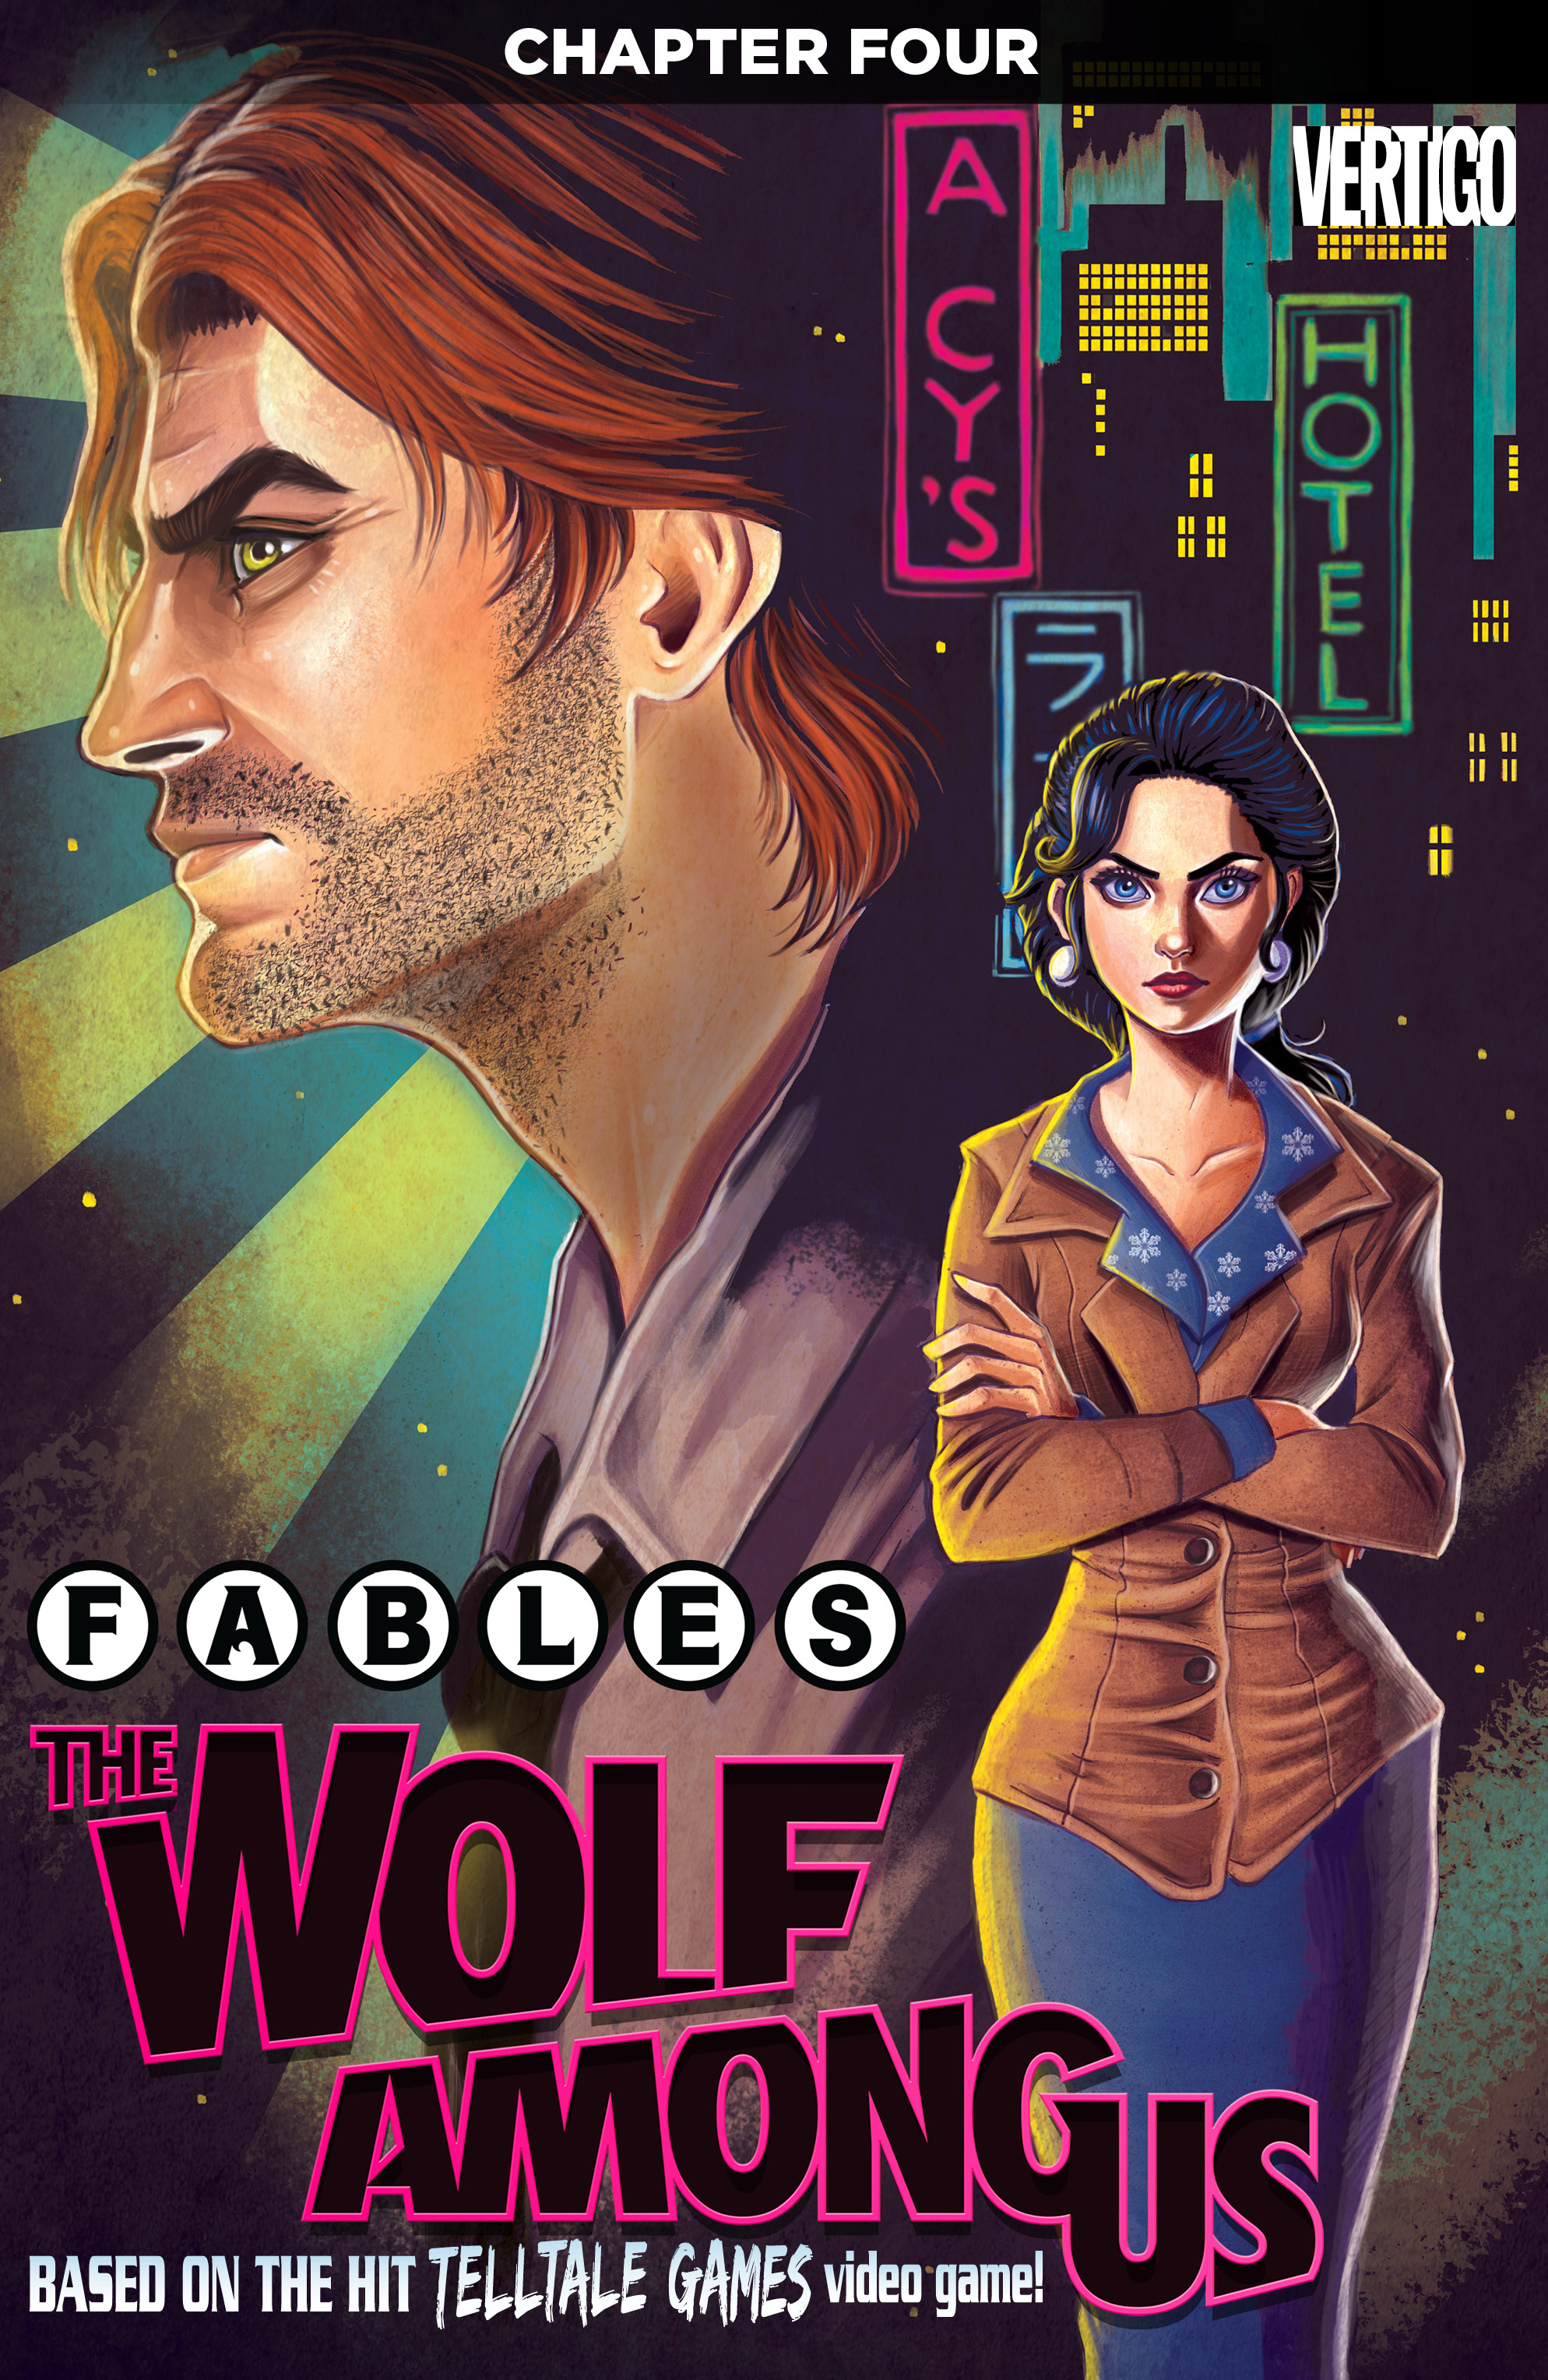 Fables: The Wolf Among Us #4 preview images